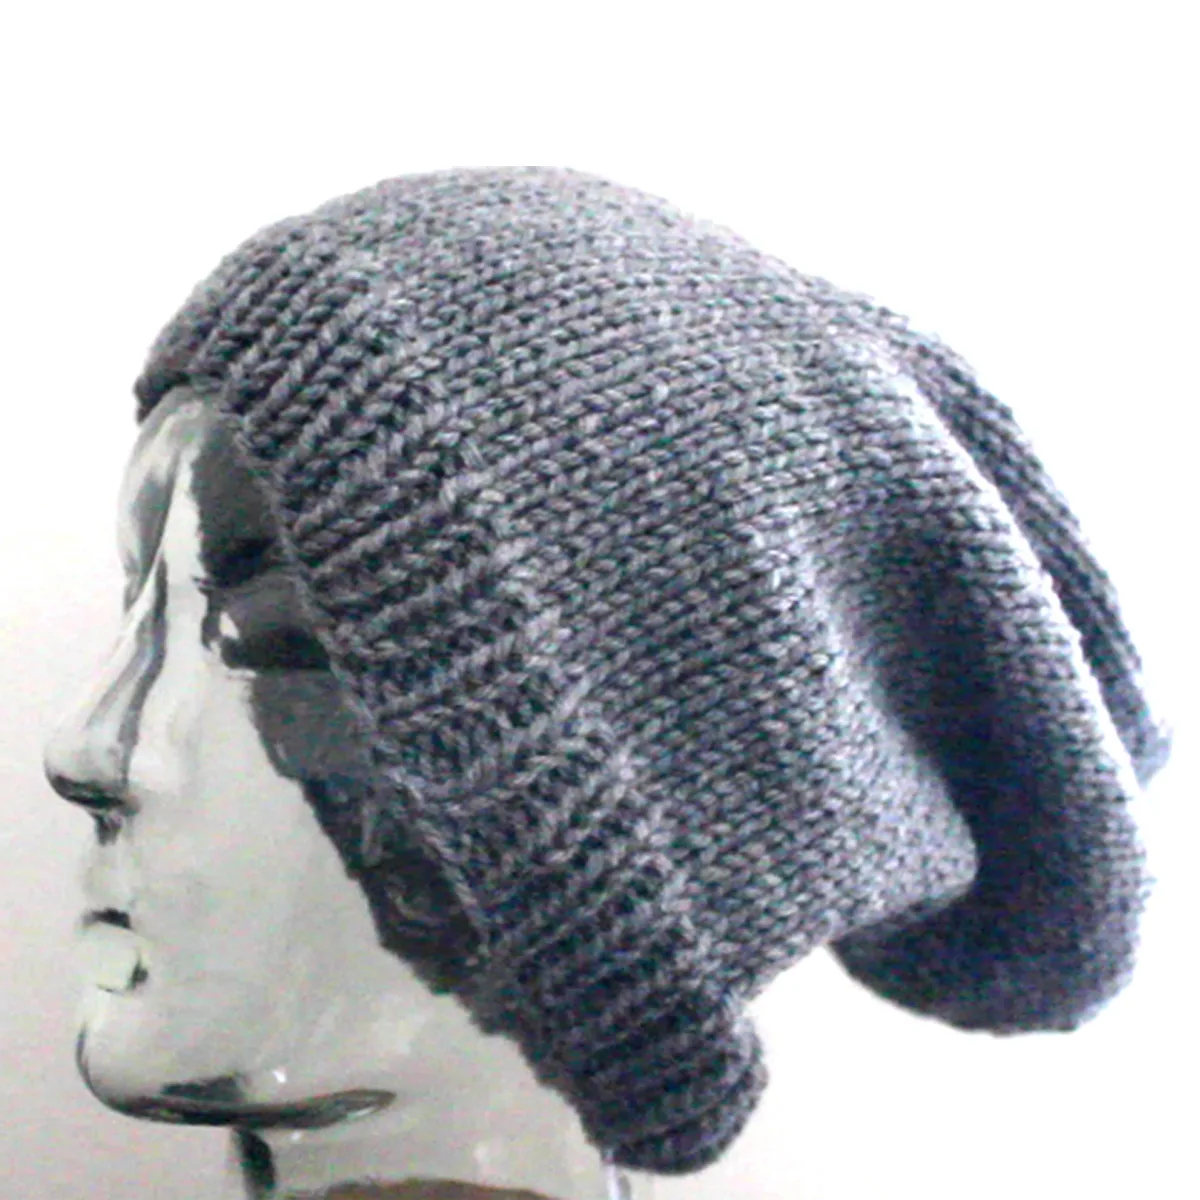 Slouchy Knitted Beanie Hat in Gray color yarn on mannequin head